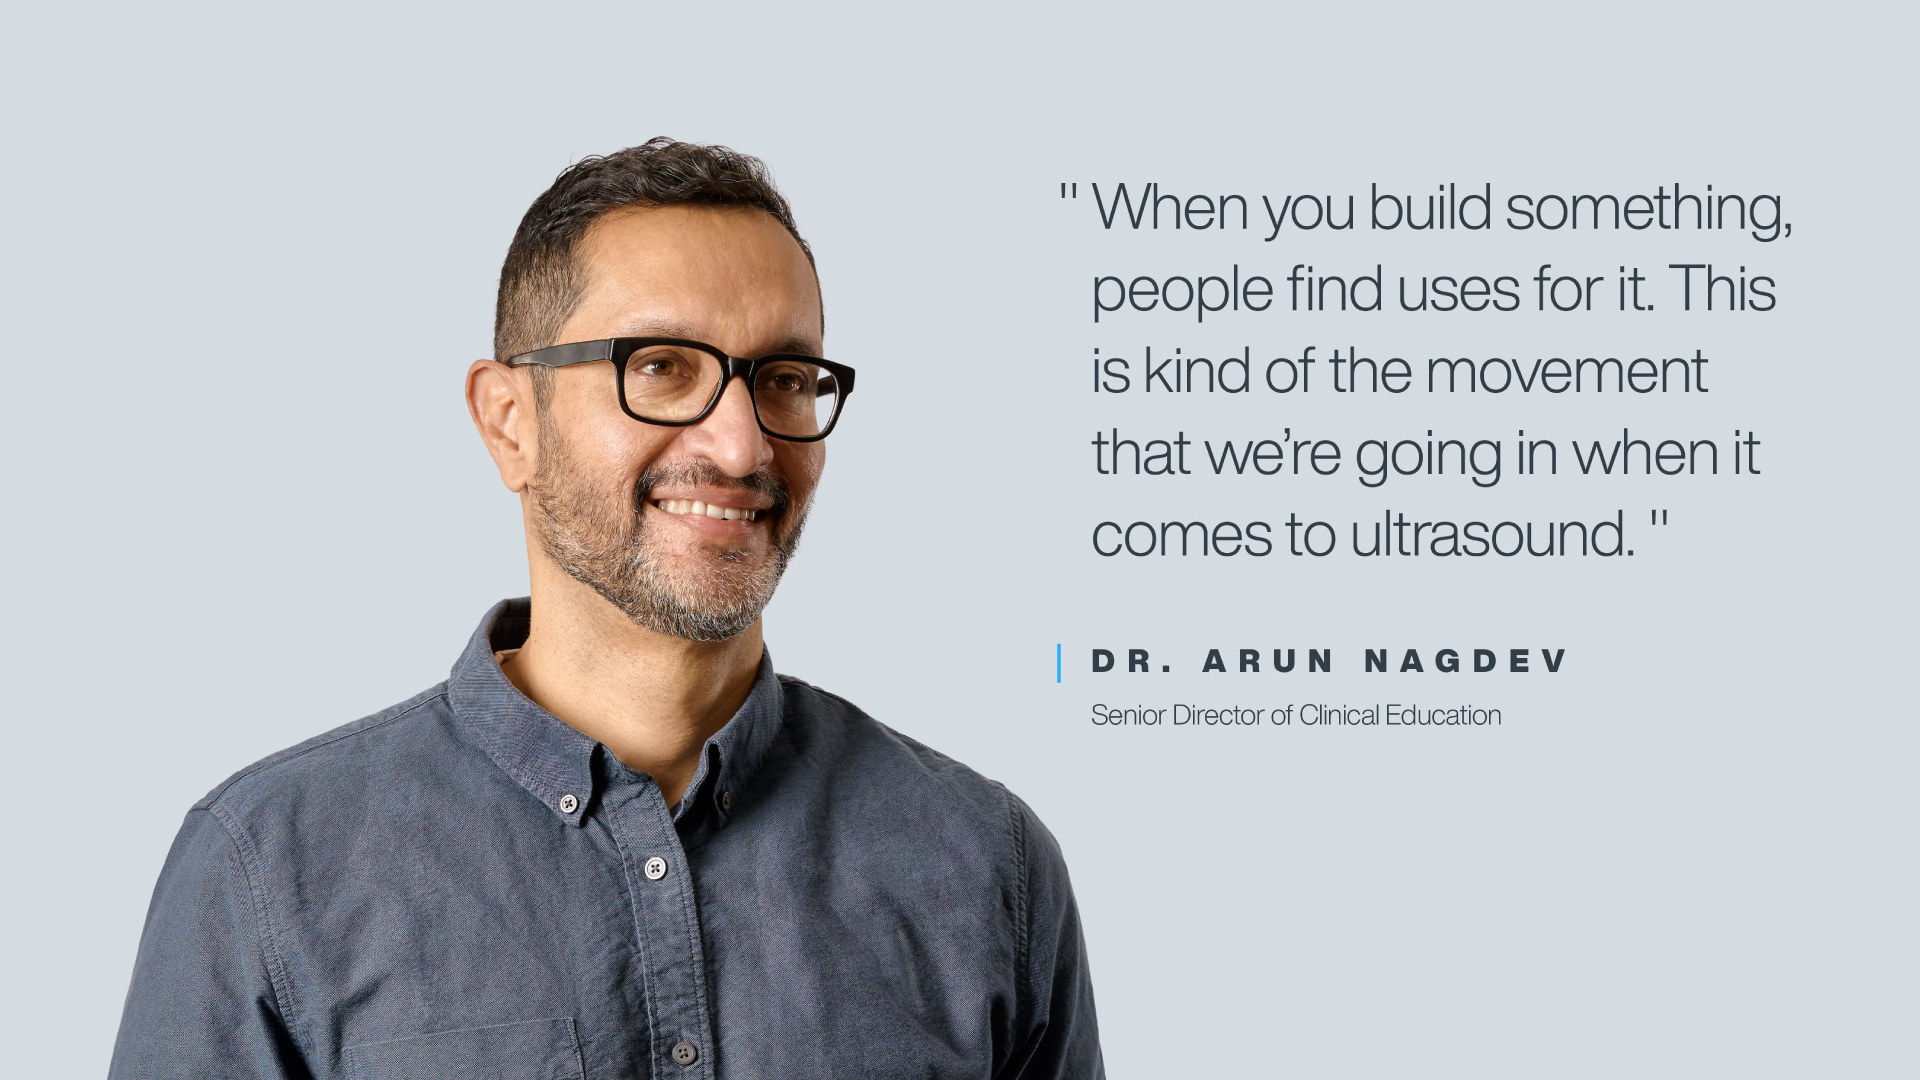 Why Dr. Arun Nagdev Uses POCUS to Improve Patient Care